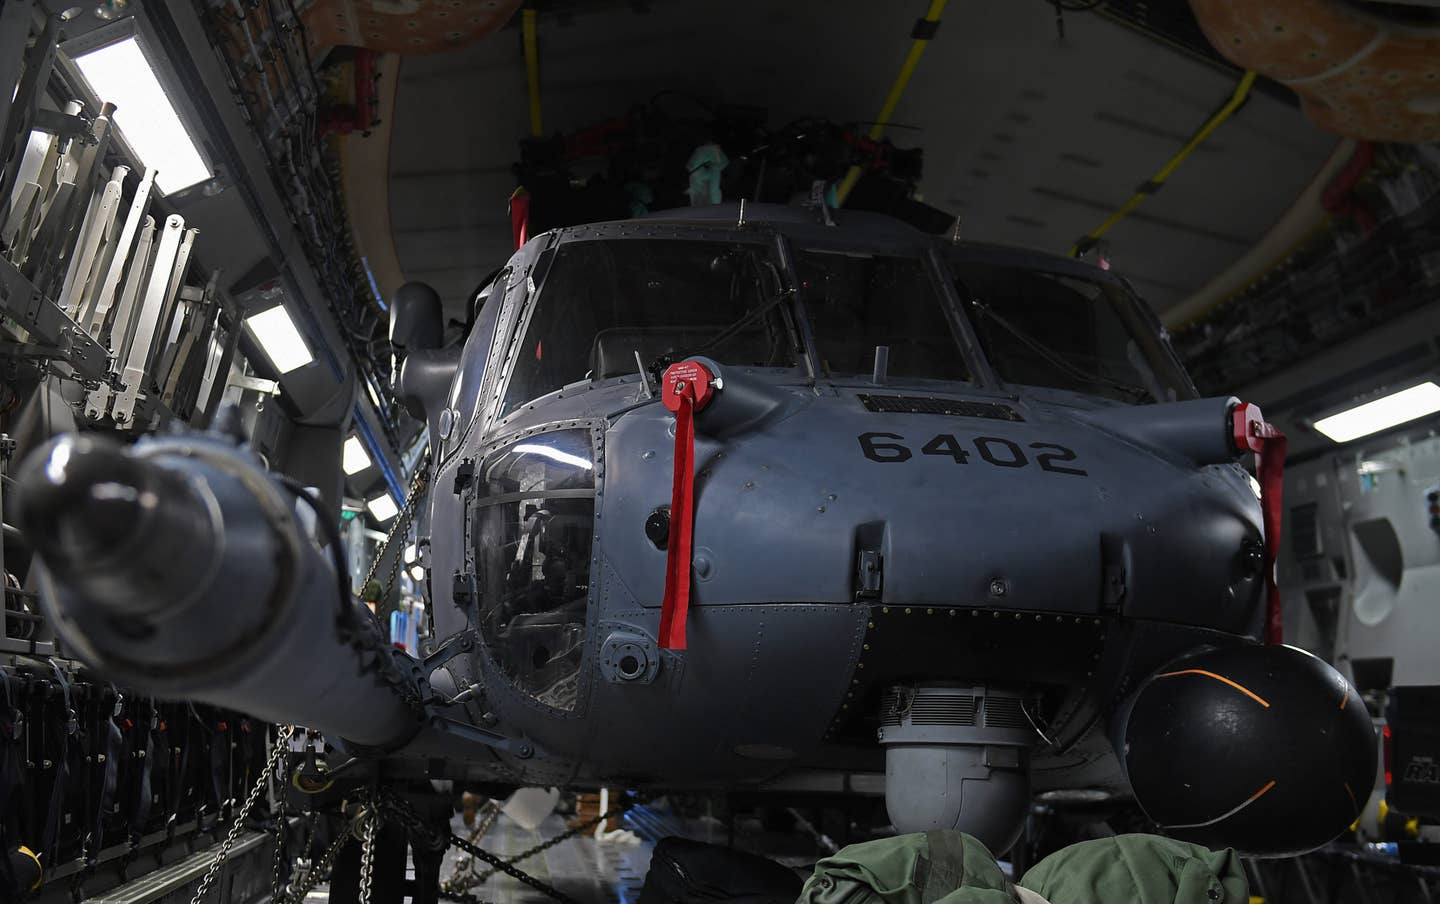 Believe it or not, the Pave Hawk is easy for a C-17 to lift. However, it is a tight fit in terms of volume. (U.S. Air Force photo)